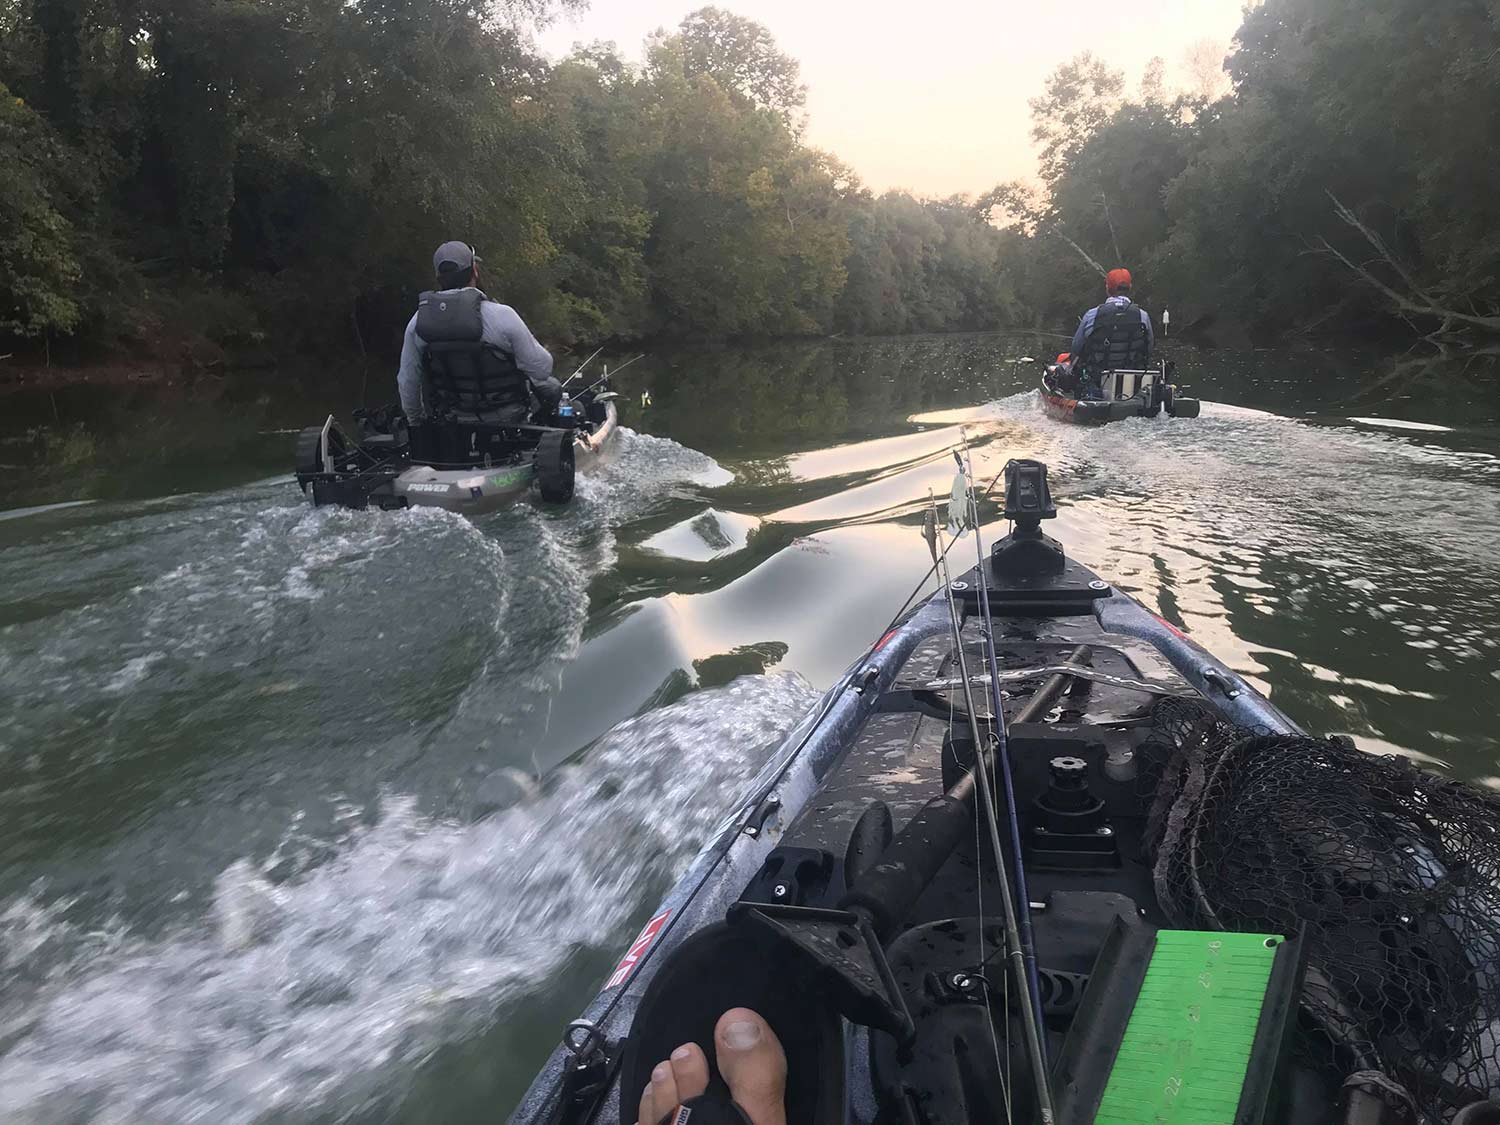 A group of anglers in a kayak troll through a stream.